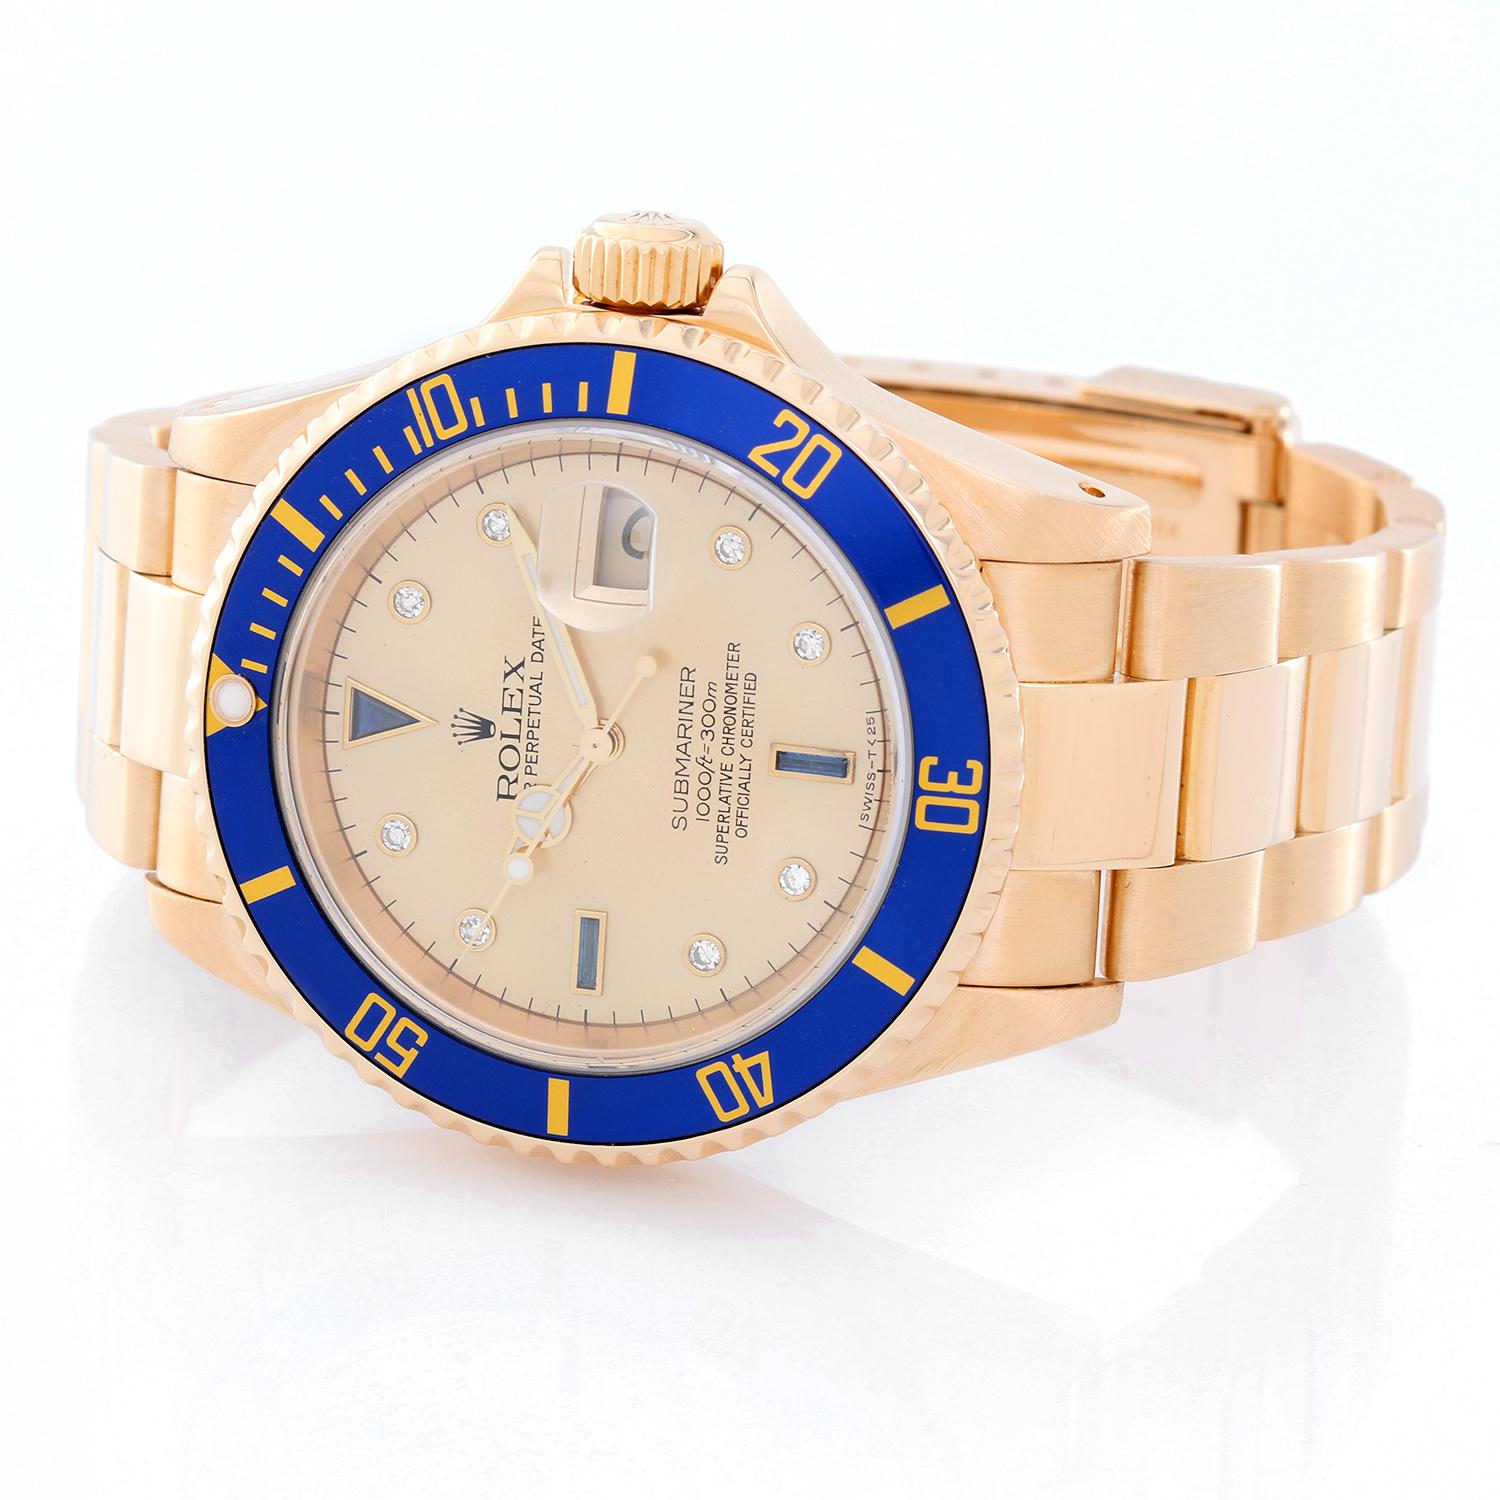 Rolex Submariner 18k Gold Men's Watch Champagne Dial  16618 - Automatic winding, 31 jewels, Quickset, sapphire crystal. 18k yellow gold case with rotating bezel with blue insert (40mm diameter). Champagne Serti dial with diamond and sapphire hour